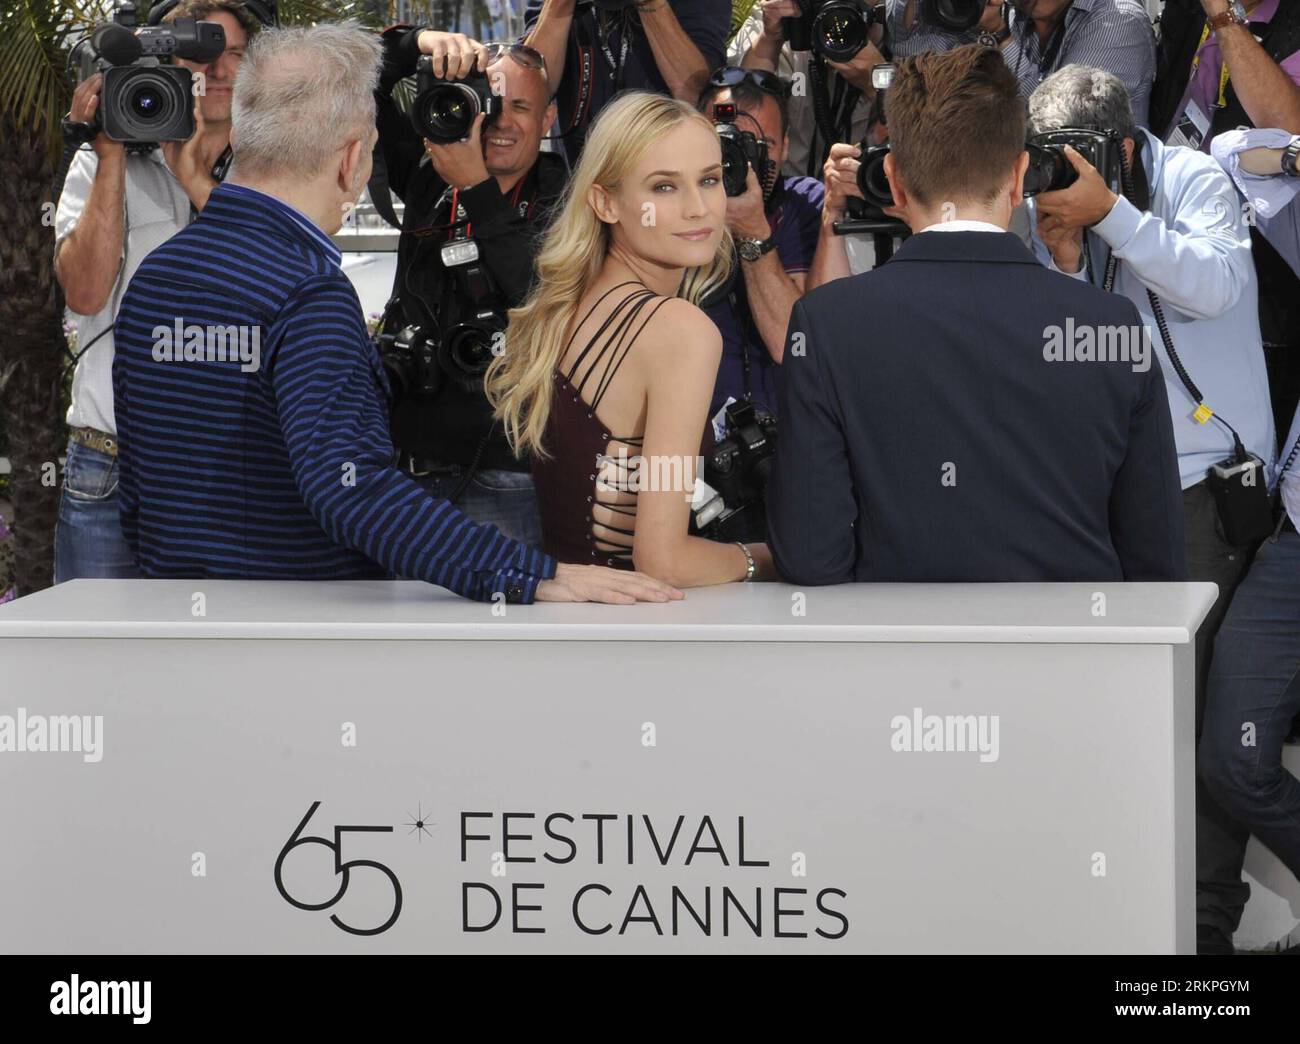 Bildnummer: 57995615  Datum: 16.05.2012  Copyright: imago/Xinhua (120516) -- CANNES, May 16, 2012 (Xinhua) -- The feature film juries of the 65th Cannes Film Festival, French designer Jean-Paul Gaultier, German actress Diane Kruger and British actor Ewan Mc Gregor (from L to R) pose for photos during a photocall in Cannes, southern France, on May 16, 2012. The festival kicked off here on Wednesday. (Xinhua/Ye Pingfan) (zjl) RANCE-CANNES-FILM FESTIVAL-PHOTOCALL-JURY PUBLICATIONxNOTxINxCHN Kultur Entertainment People Film 65. Internationale Filmfestspiele Cannes Photocall x0x xst 2012 quer Aufma Stock Photo